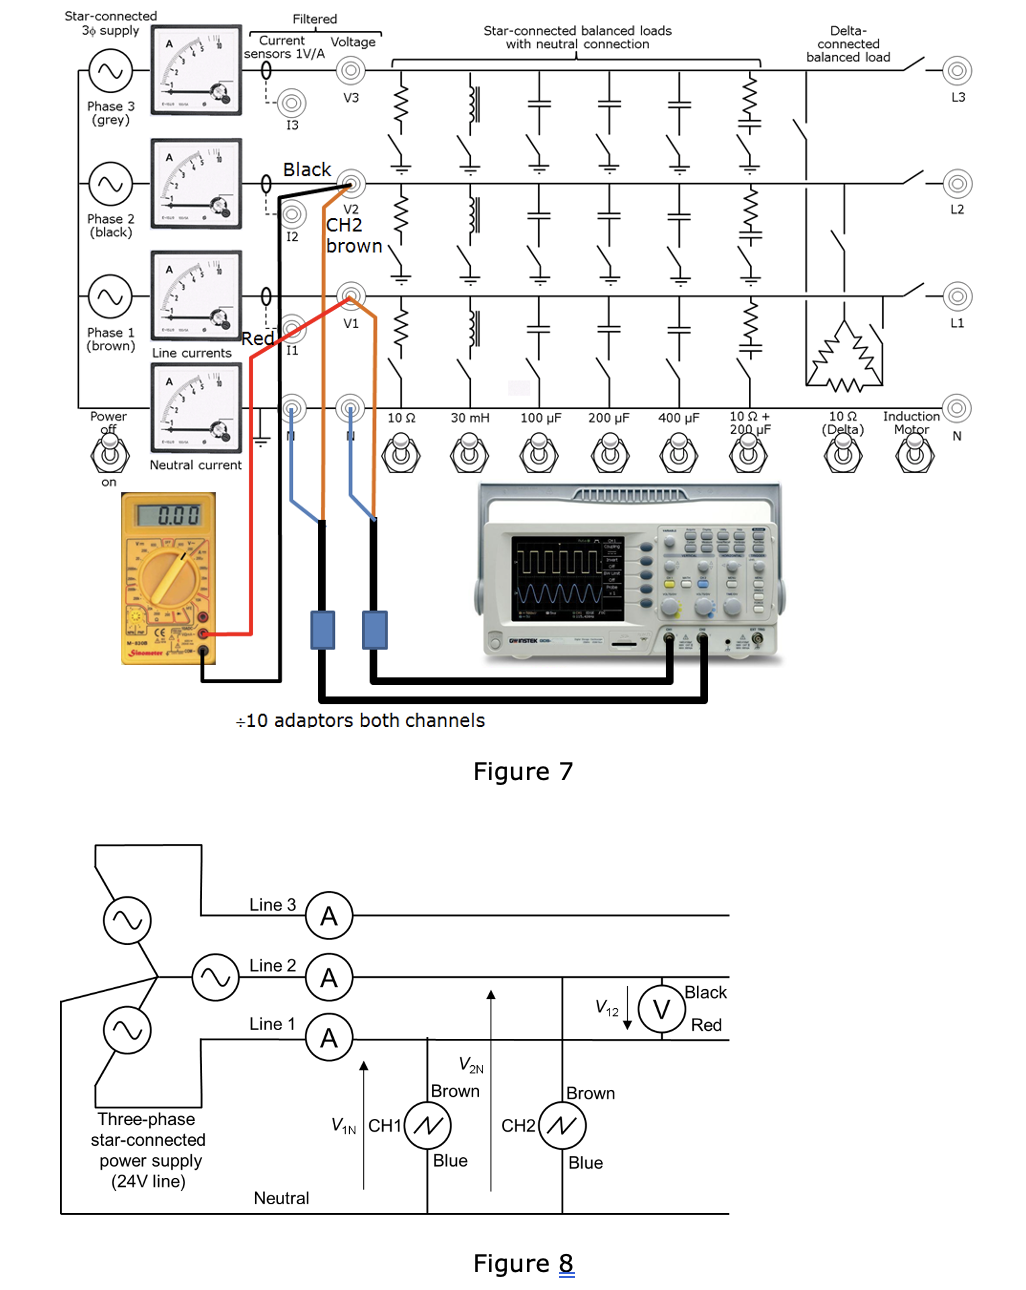 Star-connected
3+ supply
Phase 3
(grey)
Filtered
Current Voltage
sensors 1V/A
Ө
13
V3
10
Phase 2
(black)
Black
Phase 1
(brown)
Red
Line currents
11
Power
Neutral current
0.00
се
Three-phase
star-connected
power supply
(24V line)
V2
CH2
brown
V1
Star-connected balanced loads
with neutral connection
HEA› HFA³· HEA
Im . m 1. m
www
10 Ω
30 mH
100 μF
200 µF
400 μF
+10 adaptors both channels
Line 3
A
Line 2
A
Line 1
A
Neutral
ww
www
Figure 7
00000
·
Delta-
connected
balanced load
102+
200 µF
10 Ω
(Delta)
Black
V12
V
Red
V2N
Brown
Brown
VIN CH1 (N)
CH2N
Blue
Blue
Figure 8
L3
Induction
Motor
L2
L1